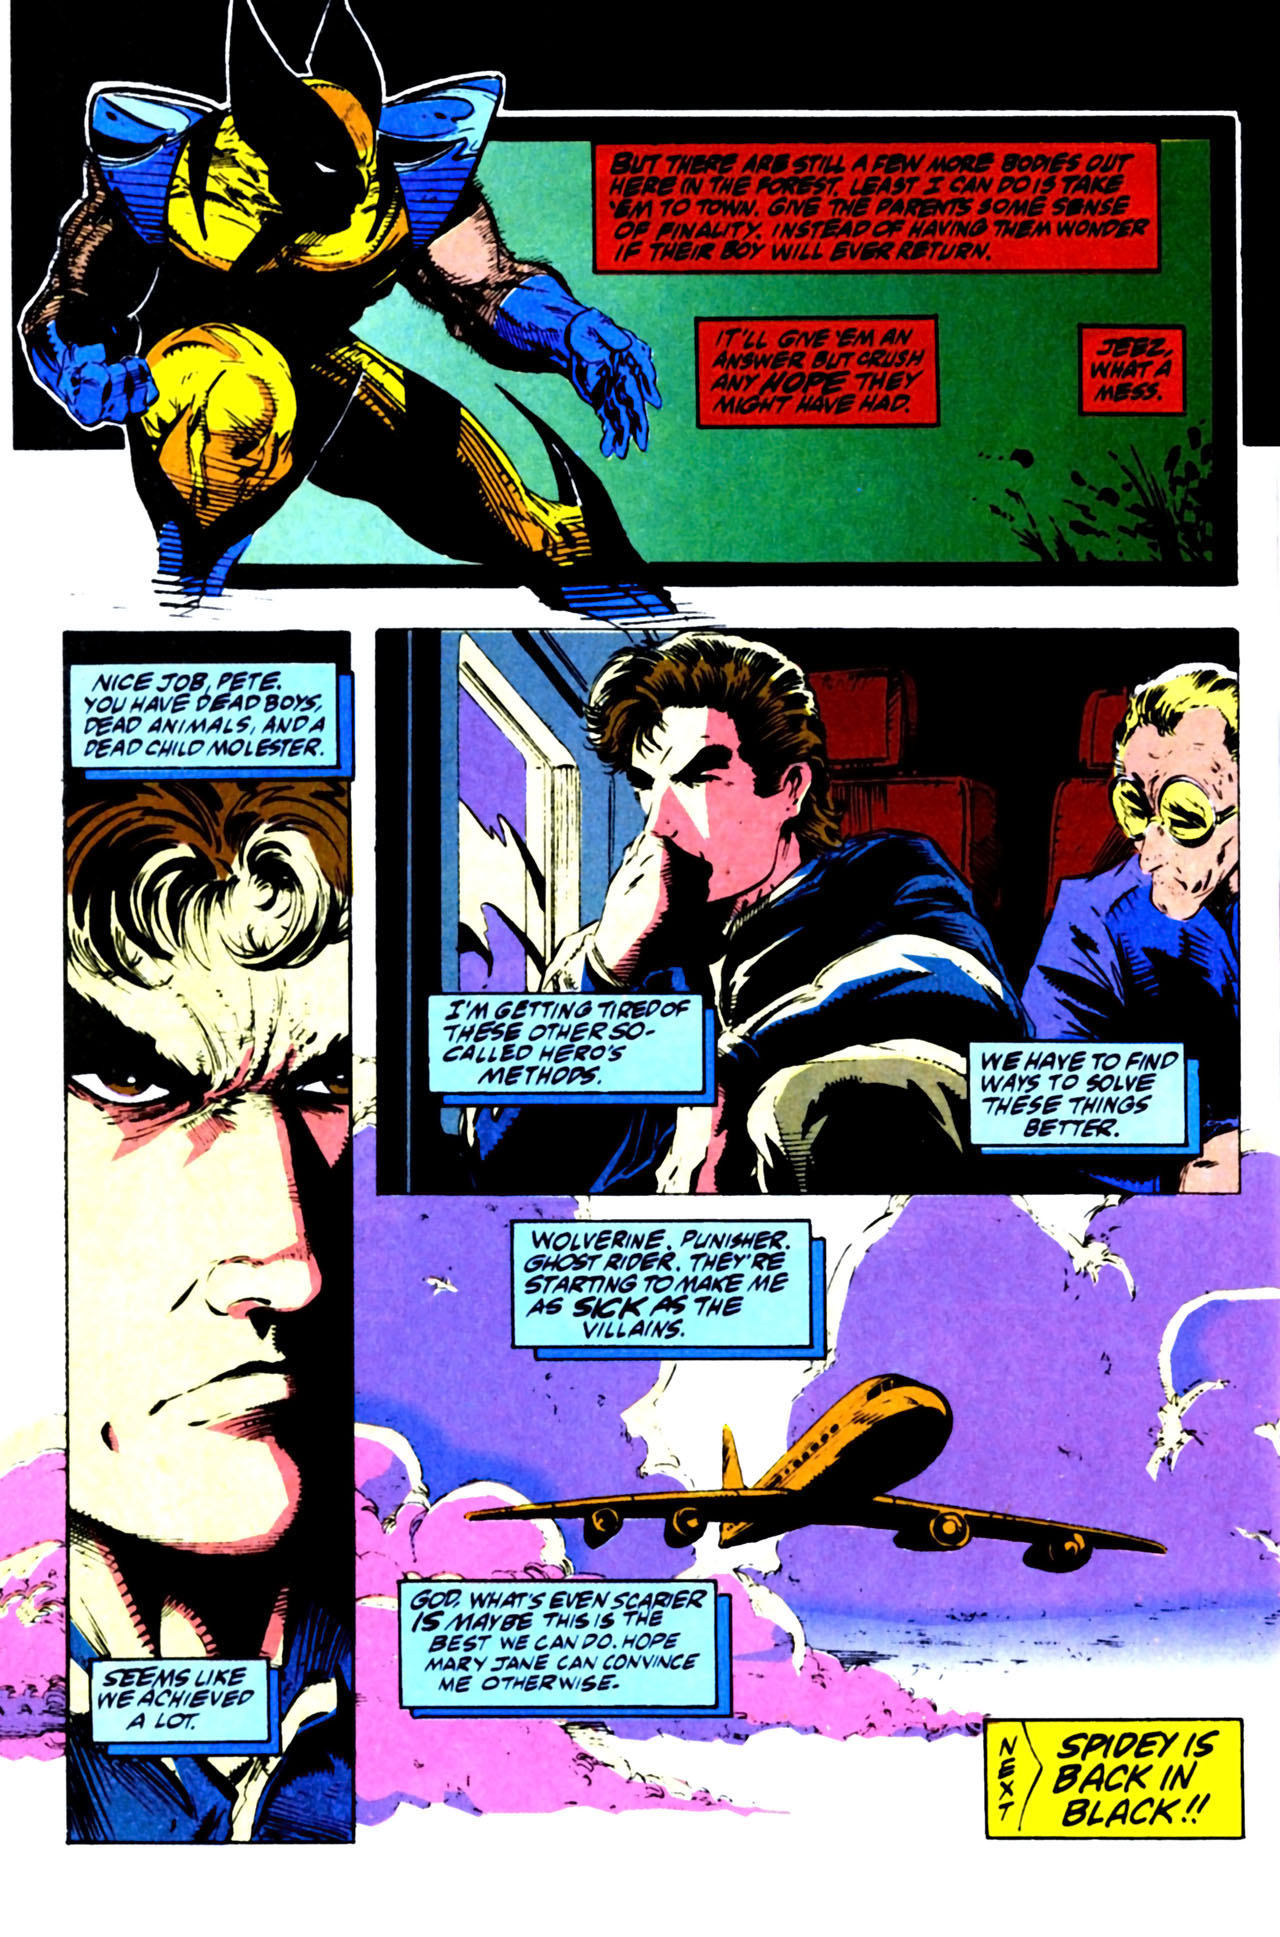 Spider-Man (1990) 12_-_Perceptions_Part_5_of_5 Page 22